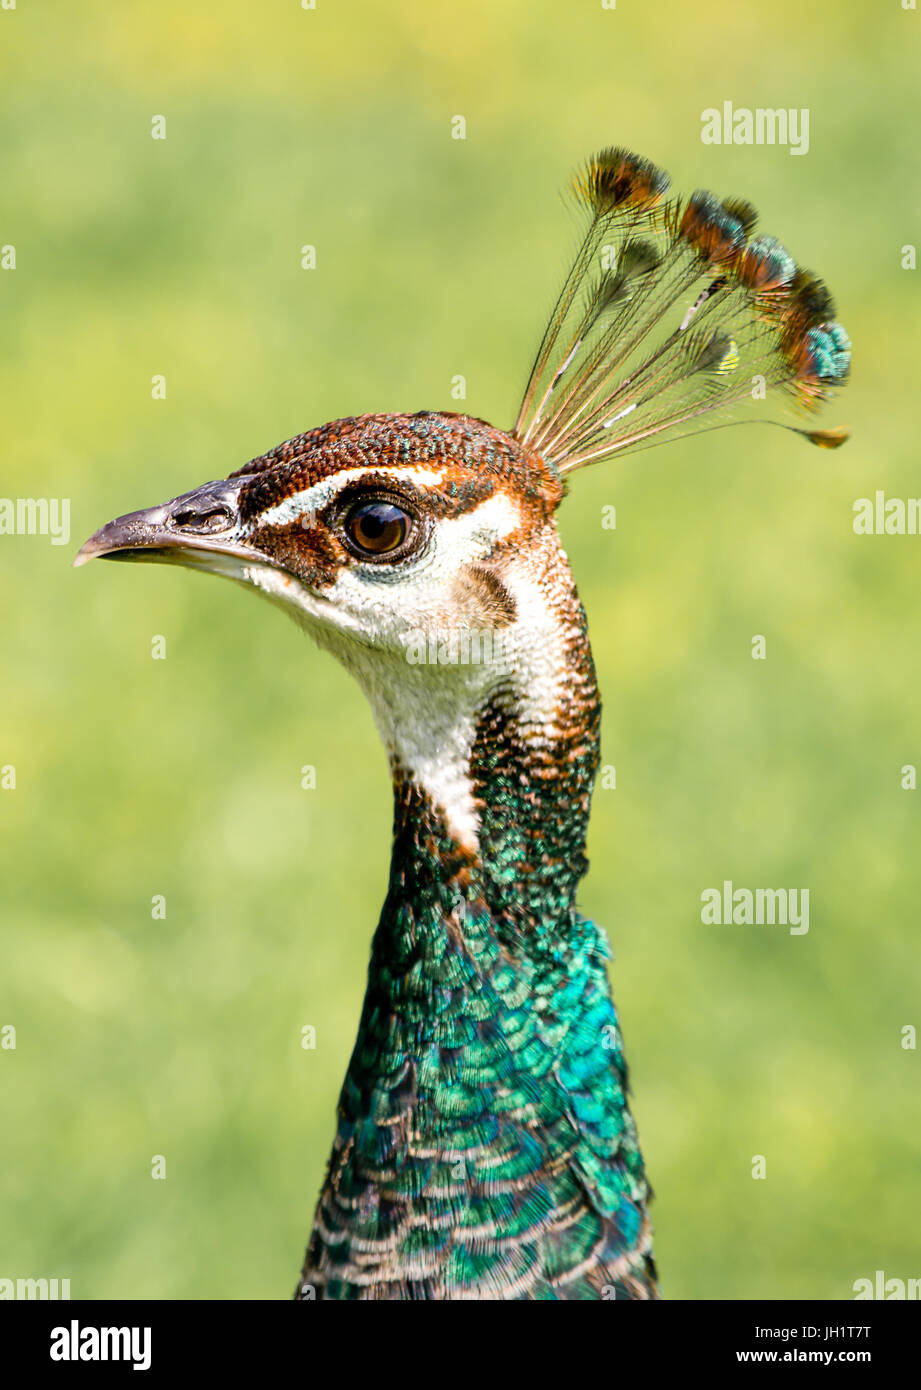 close up of peahen head Stock Photo